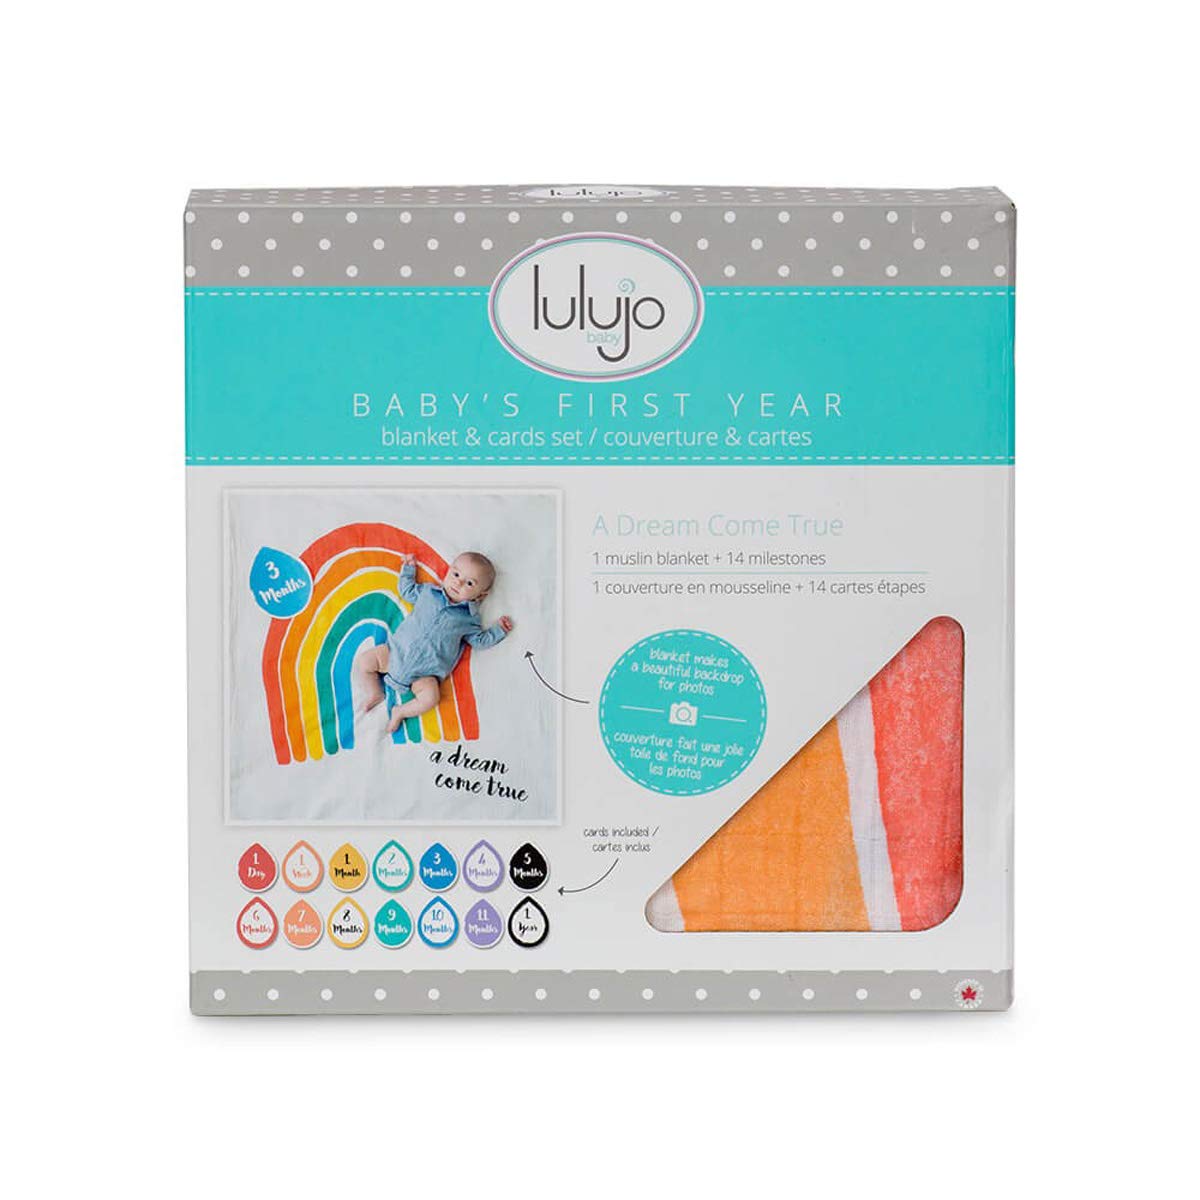 Lulujo “A Dream Come True” Baby’s First Year Blanket & Cards Set